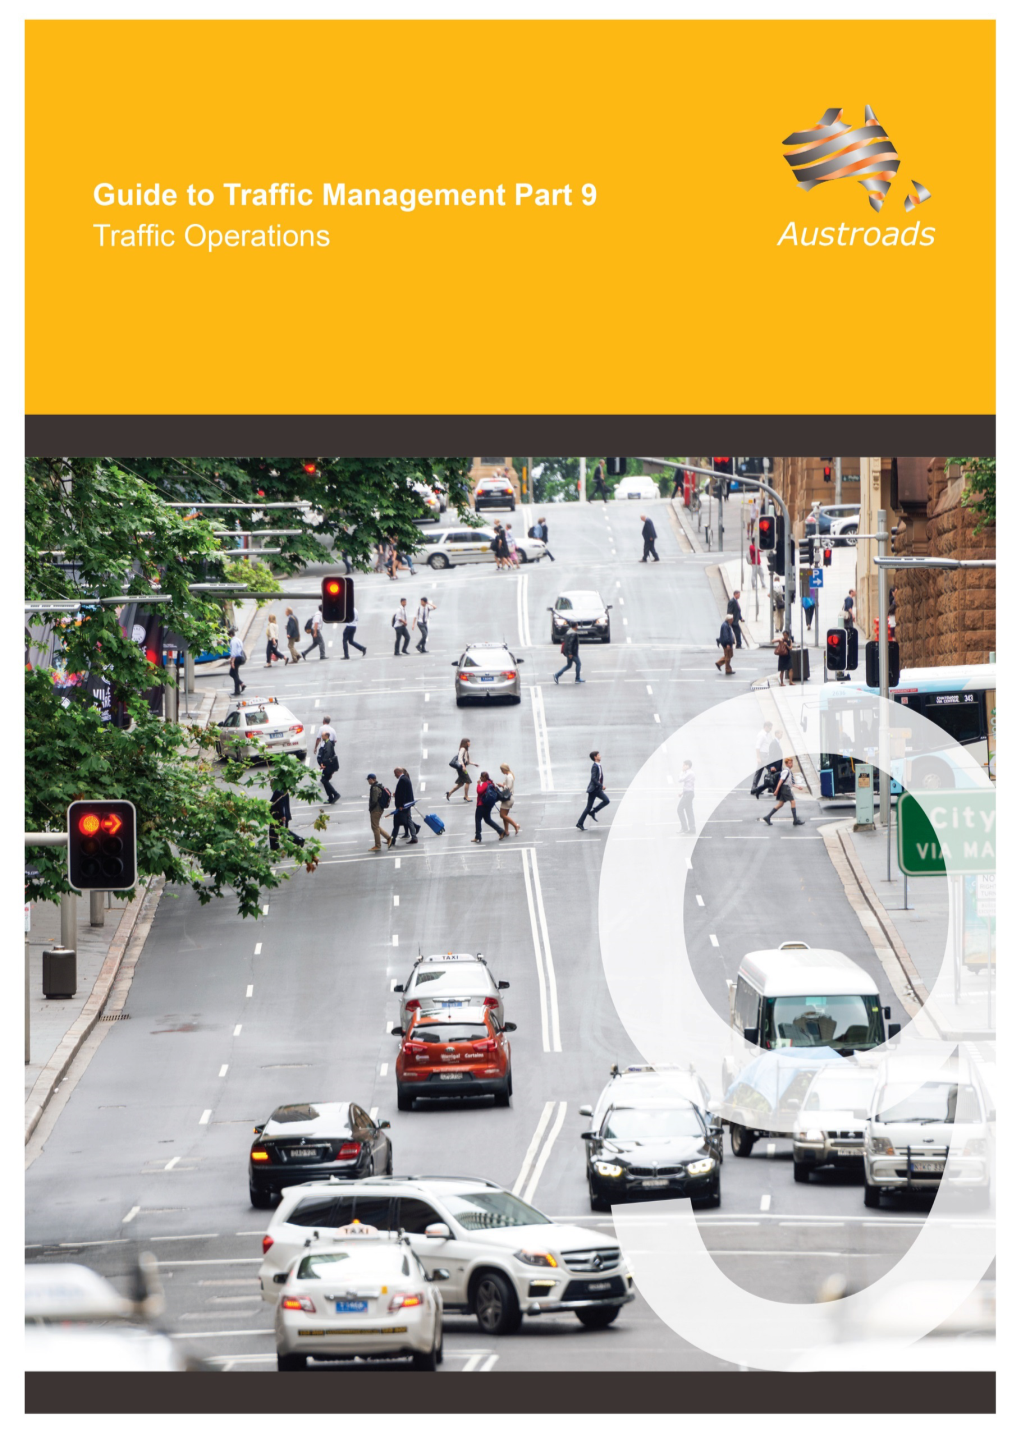 Guide to Traffic Management Part 9: Traffic Operations